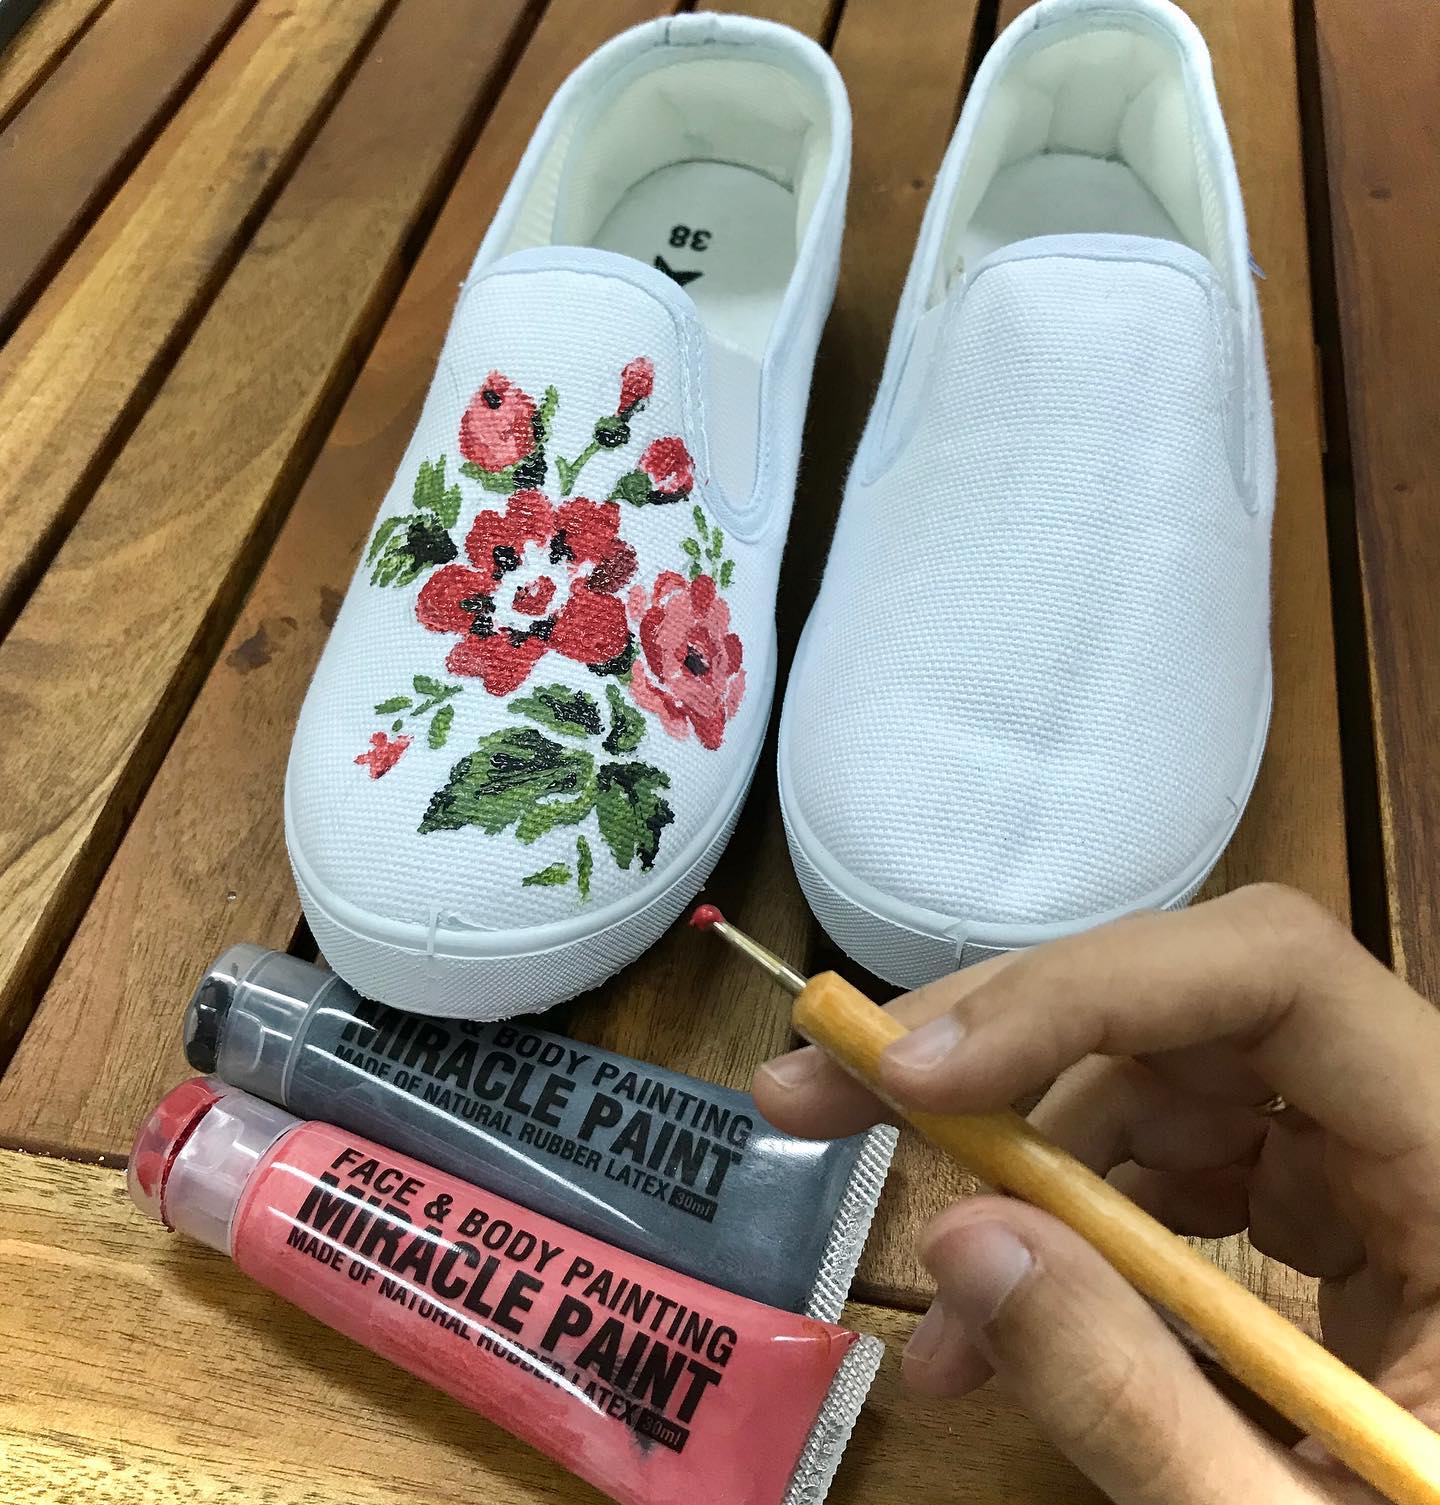 White shoes and Paint Set